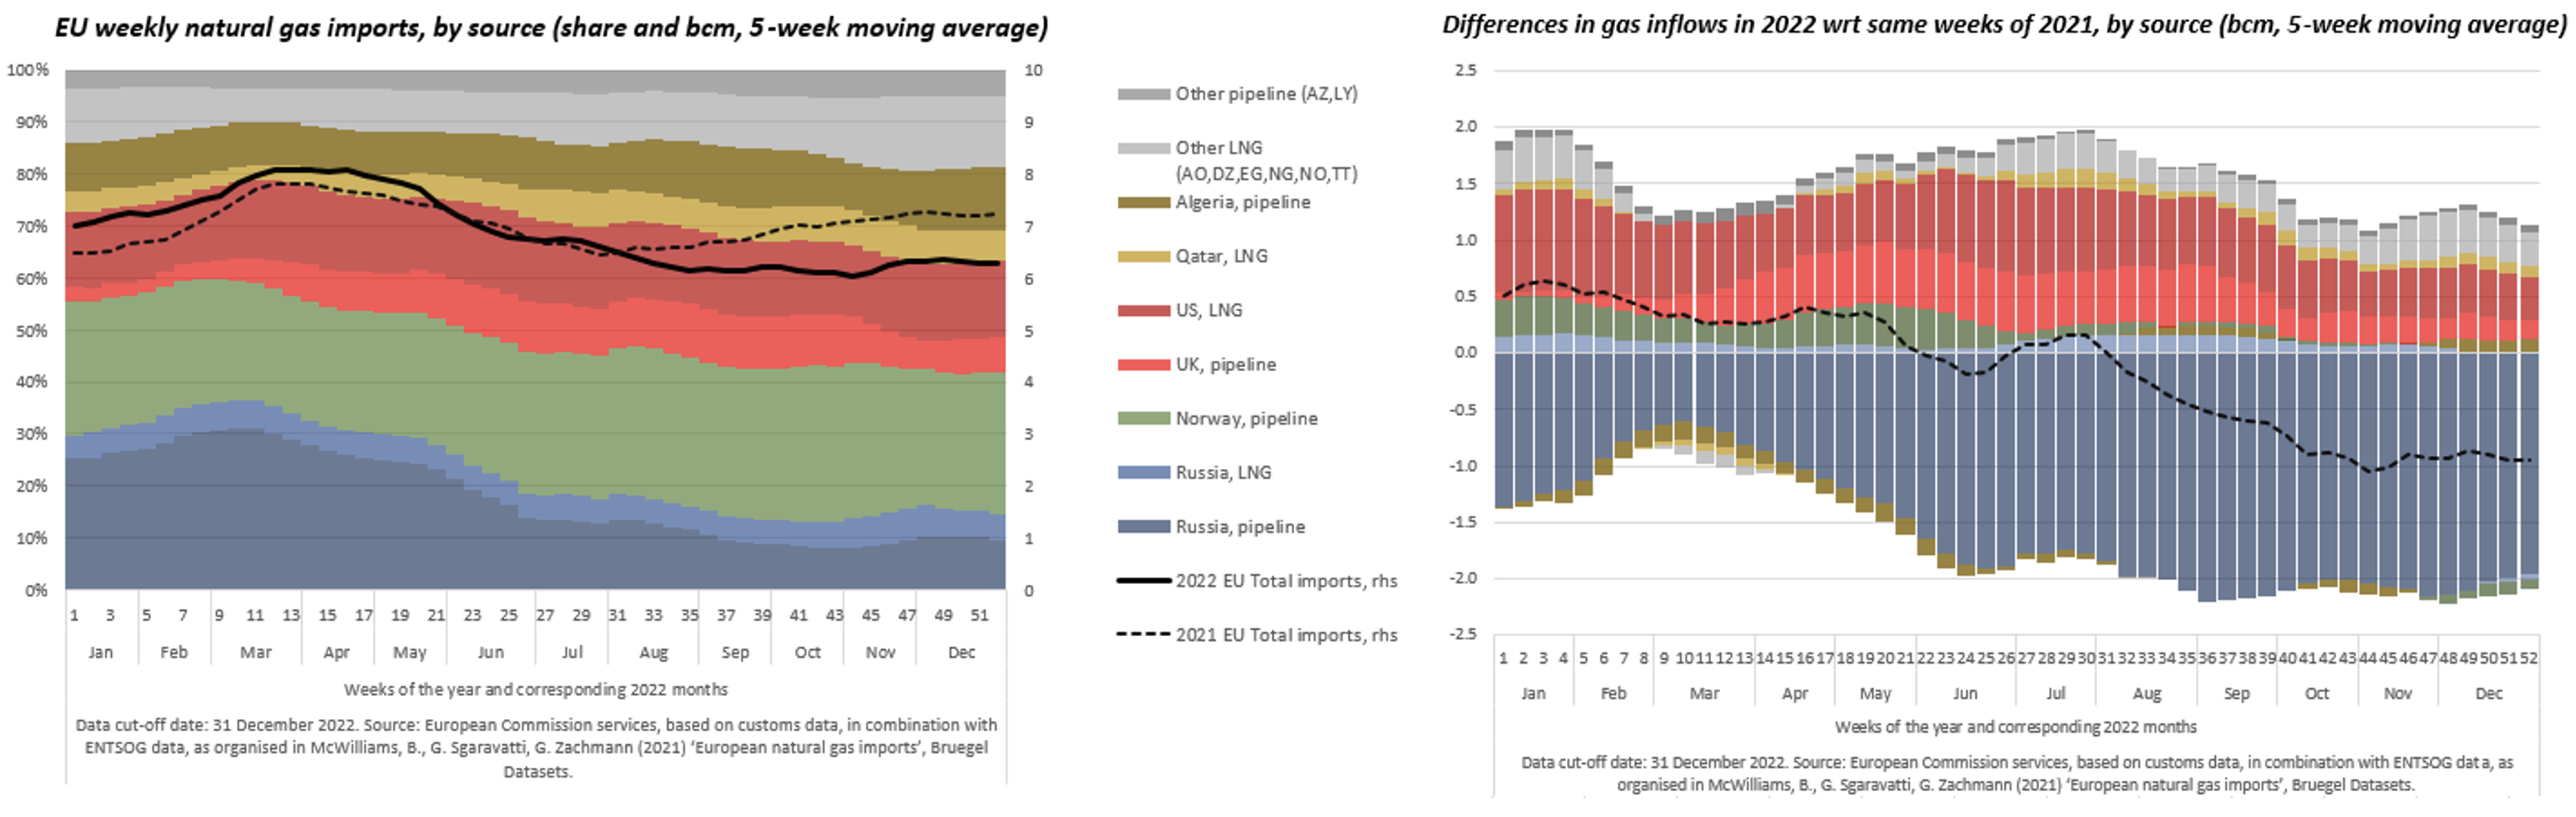 Figure 3 Weekly natural gas flows (pipeline and LNG) into the EU by source in 2022 and 2022-2021 differentials